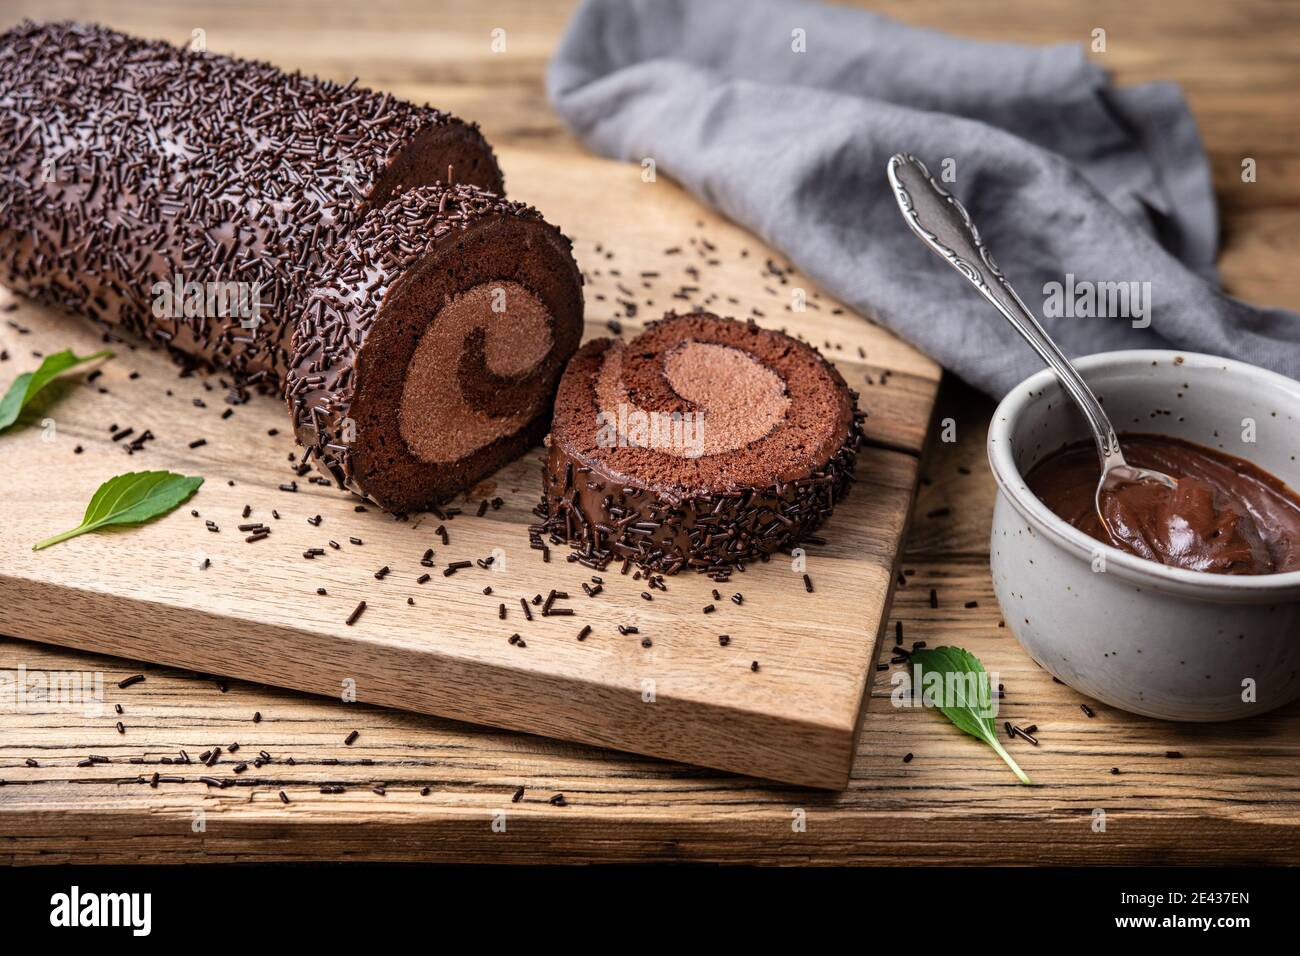 Chocolate cake roll with cocoa filling, topped with ganache glaze and sprinkles on wooden background Stock Photo